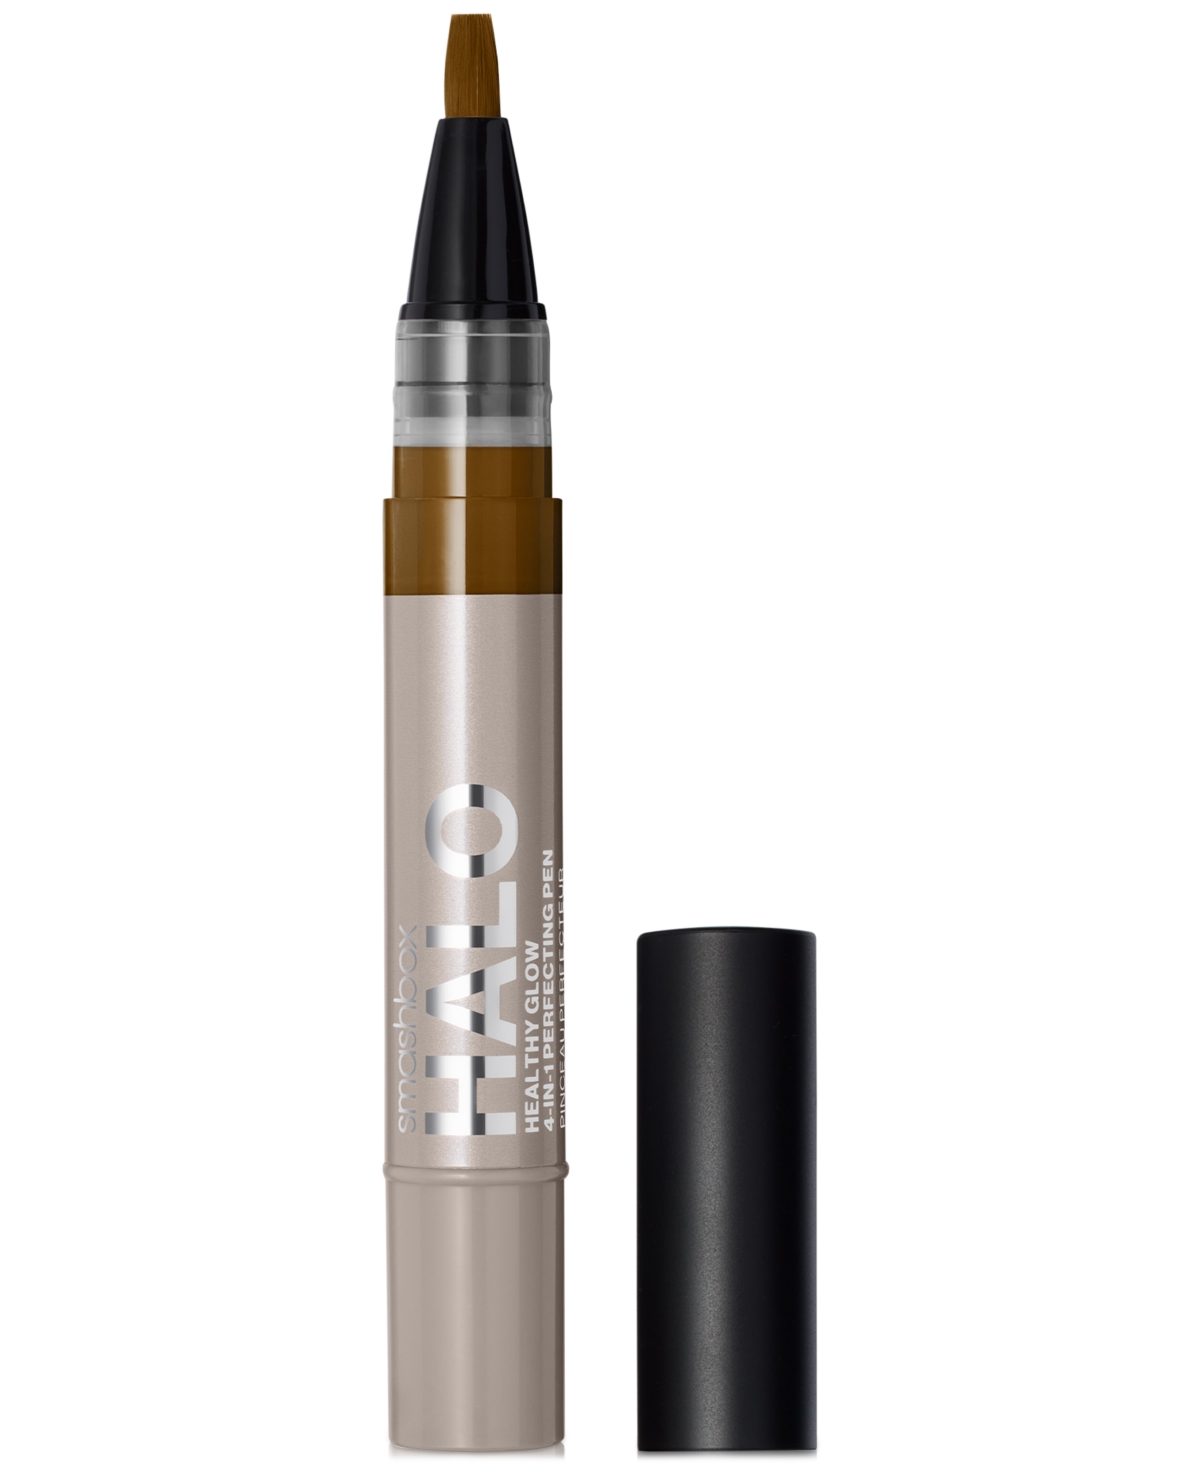 Smashbox Halo Healthy Glow 4-in-1 Perfecting Pen In D-w (level-three Dark With A Warm Undert